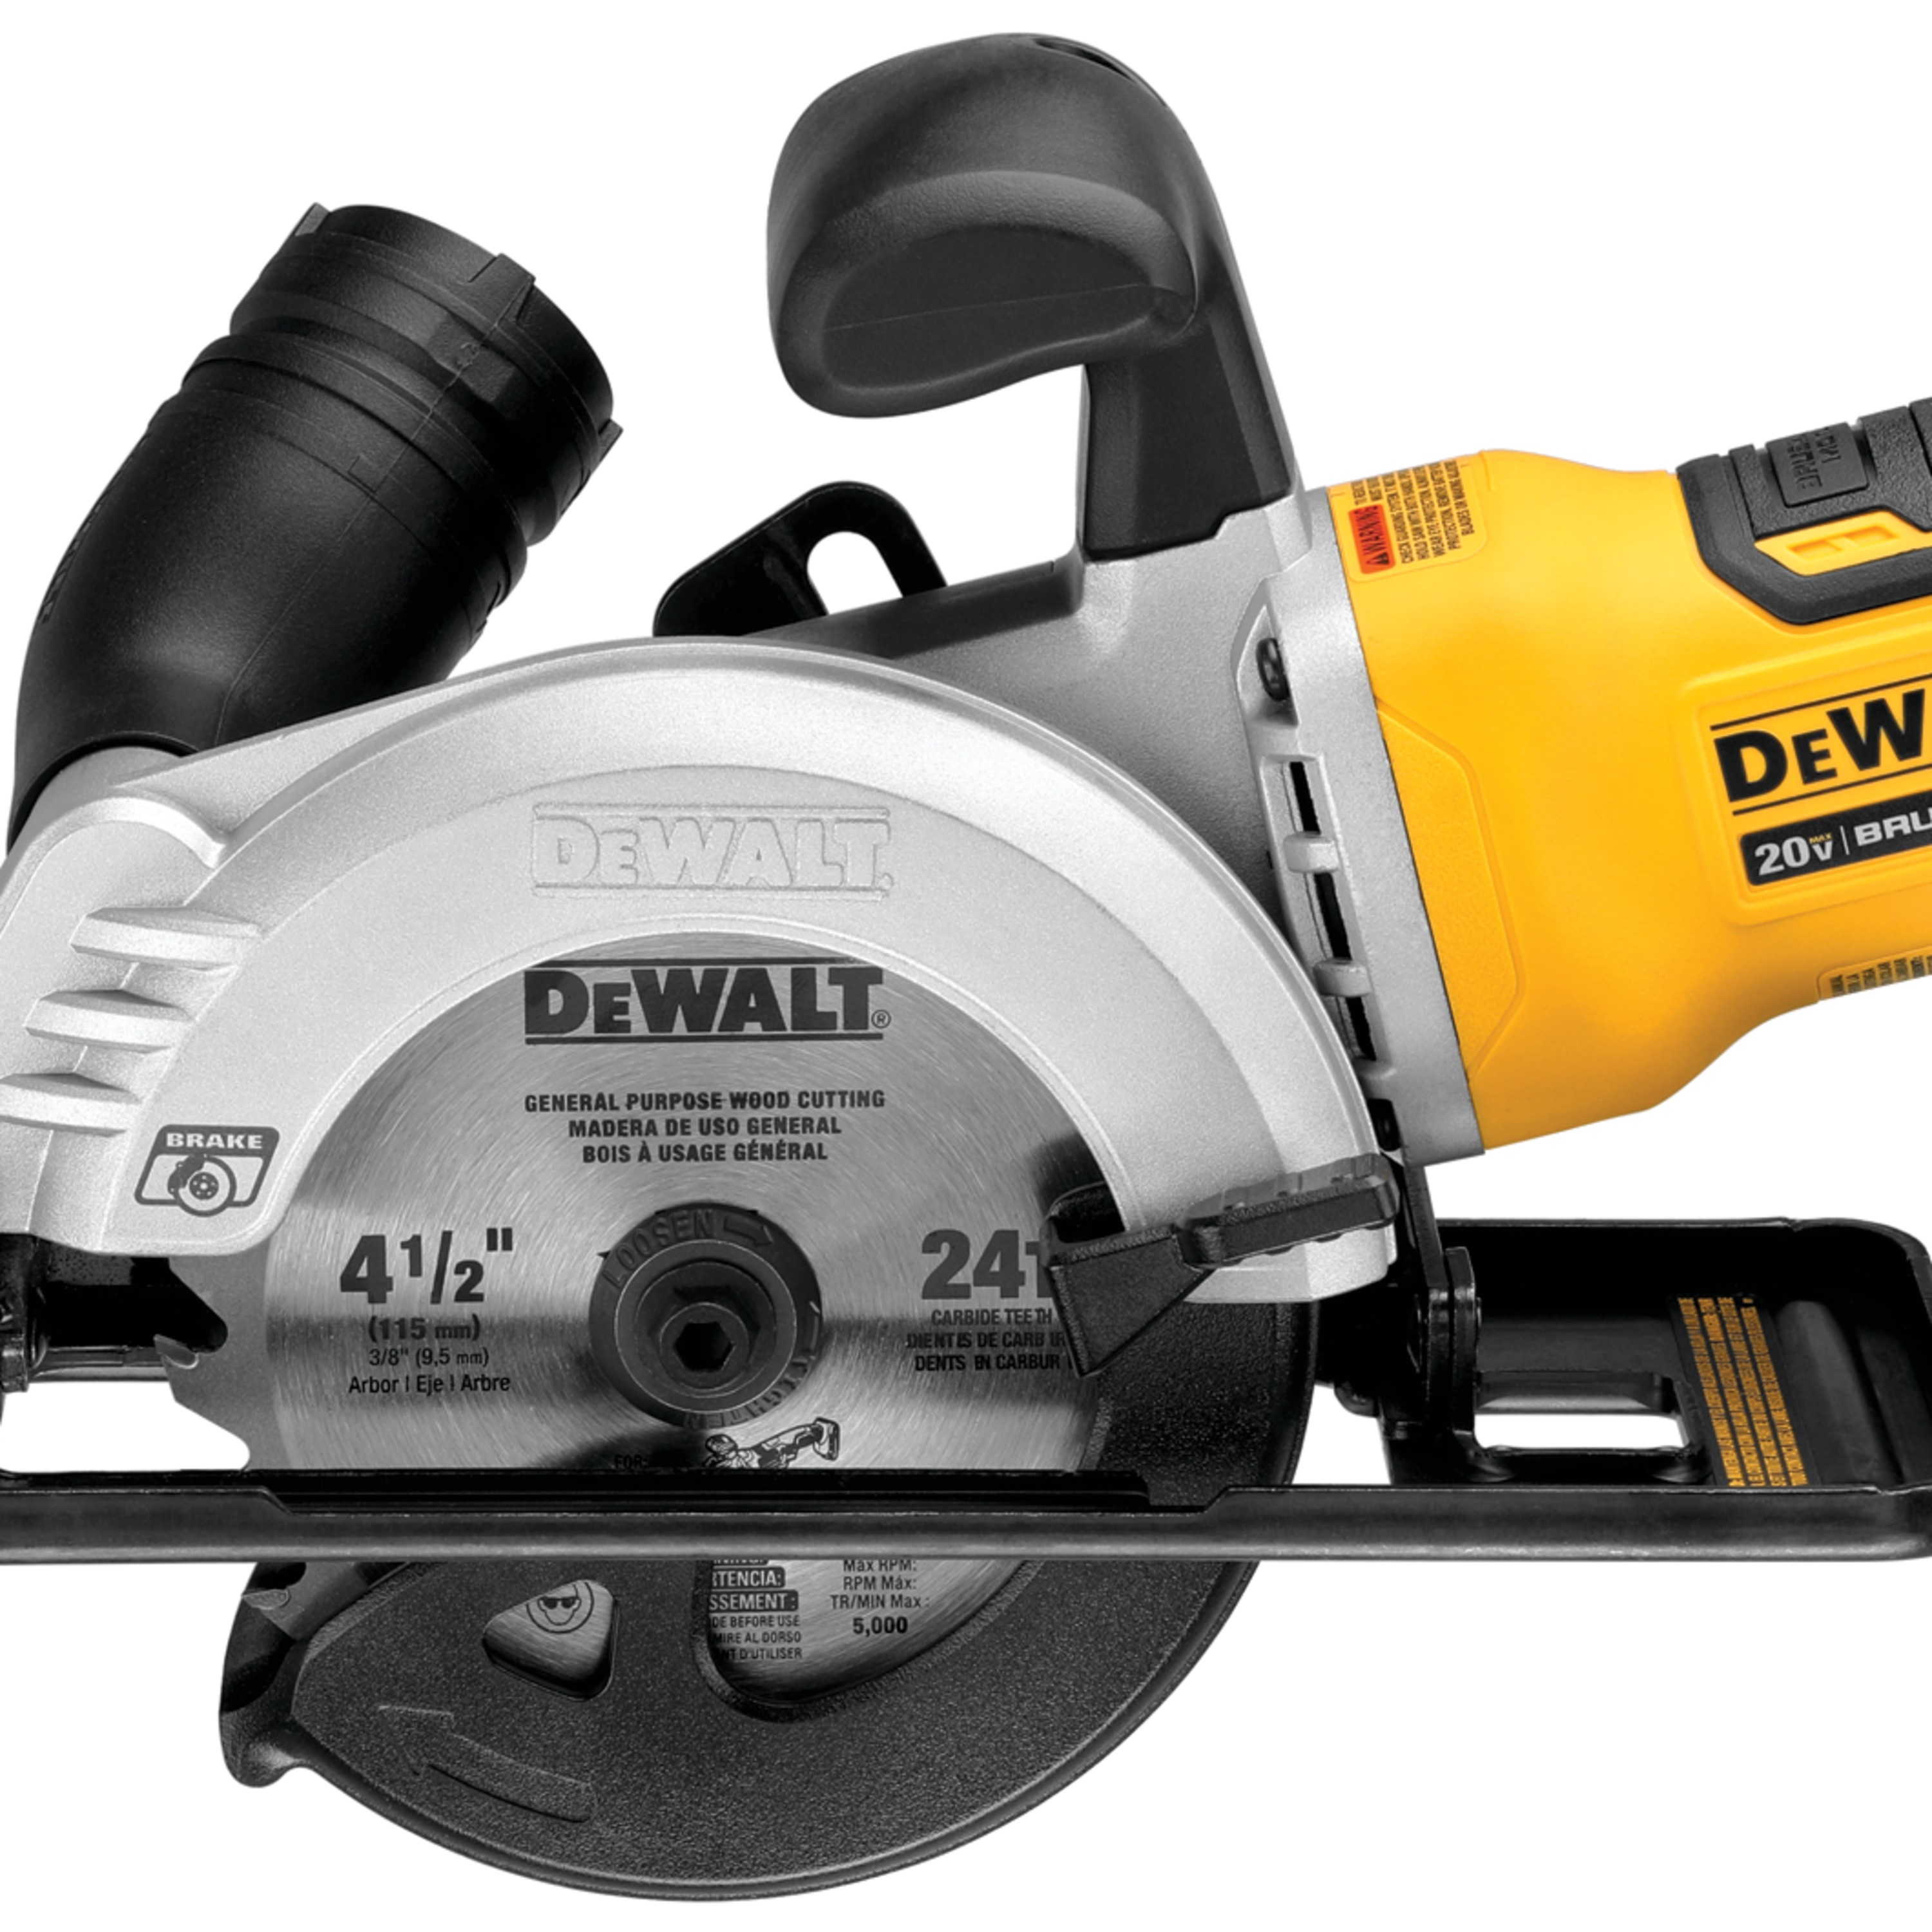 ATOMIC brushless cordless circular saw featuring rip fence and dust port adaptor.